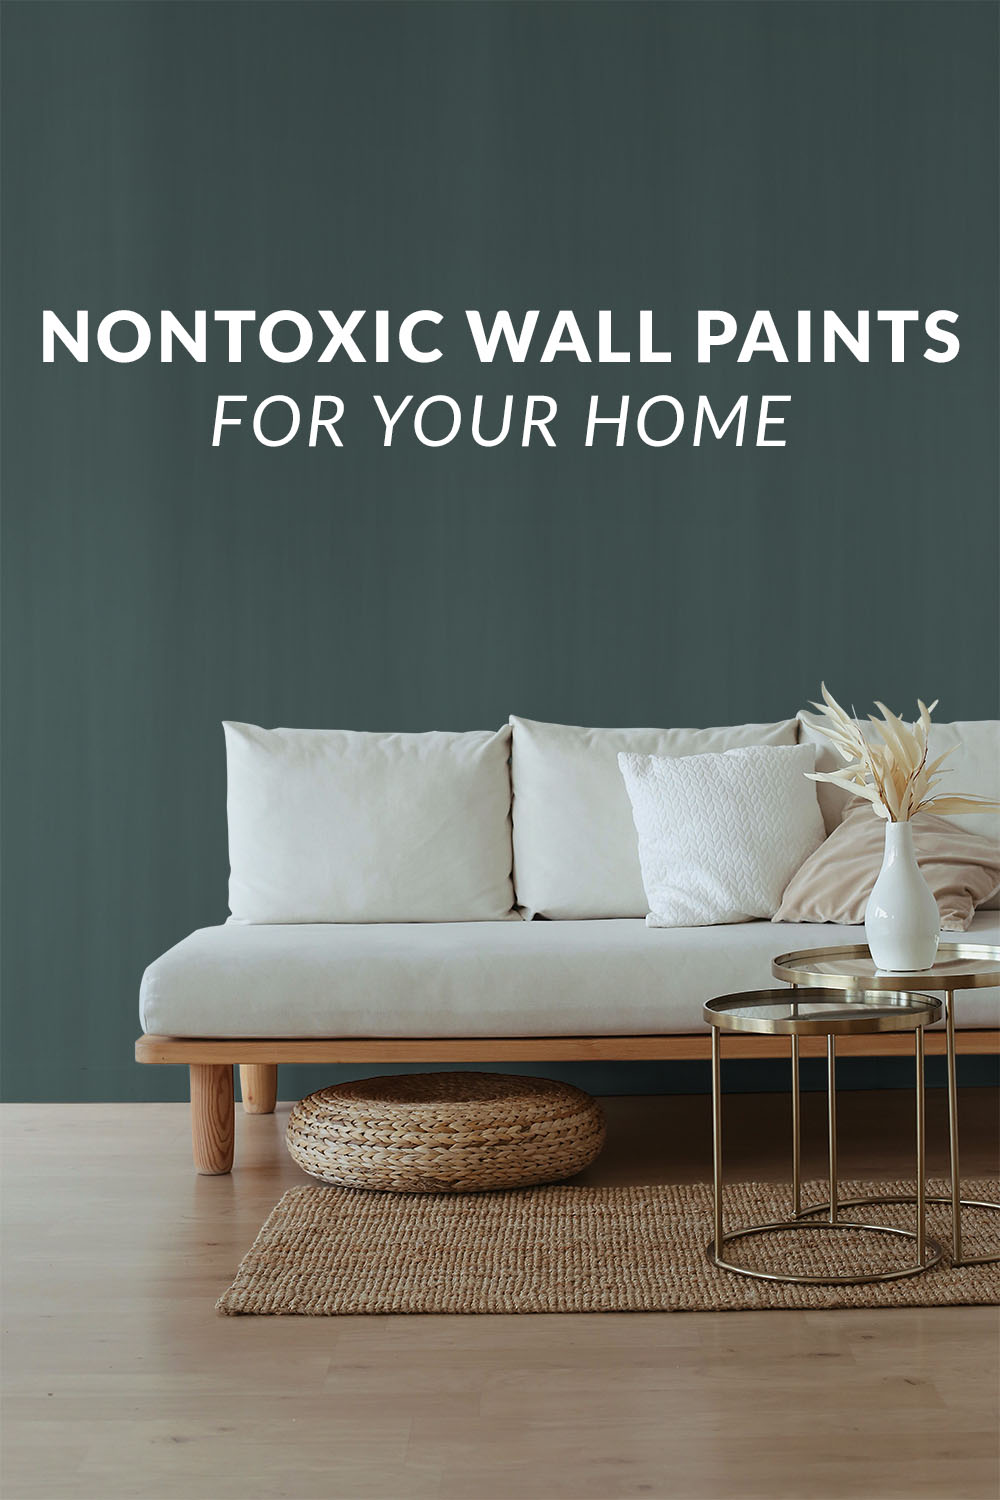 Nontoxic Wall Paints for your home